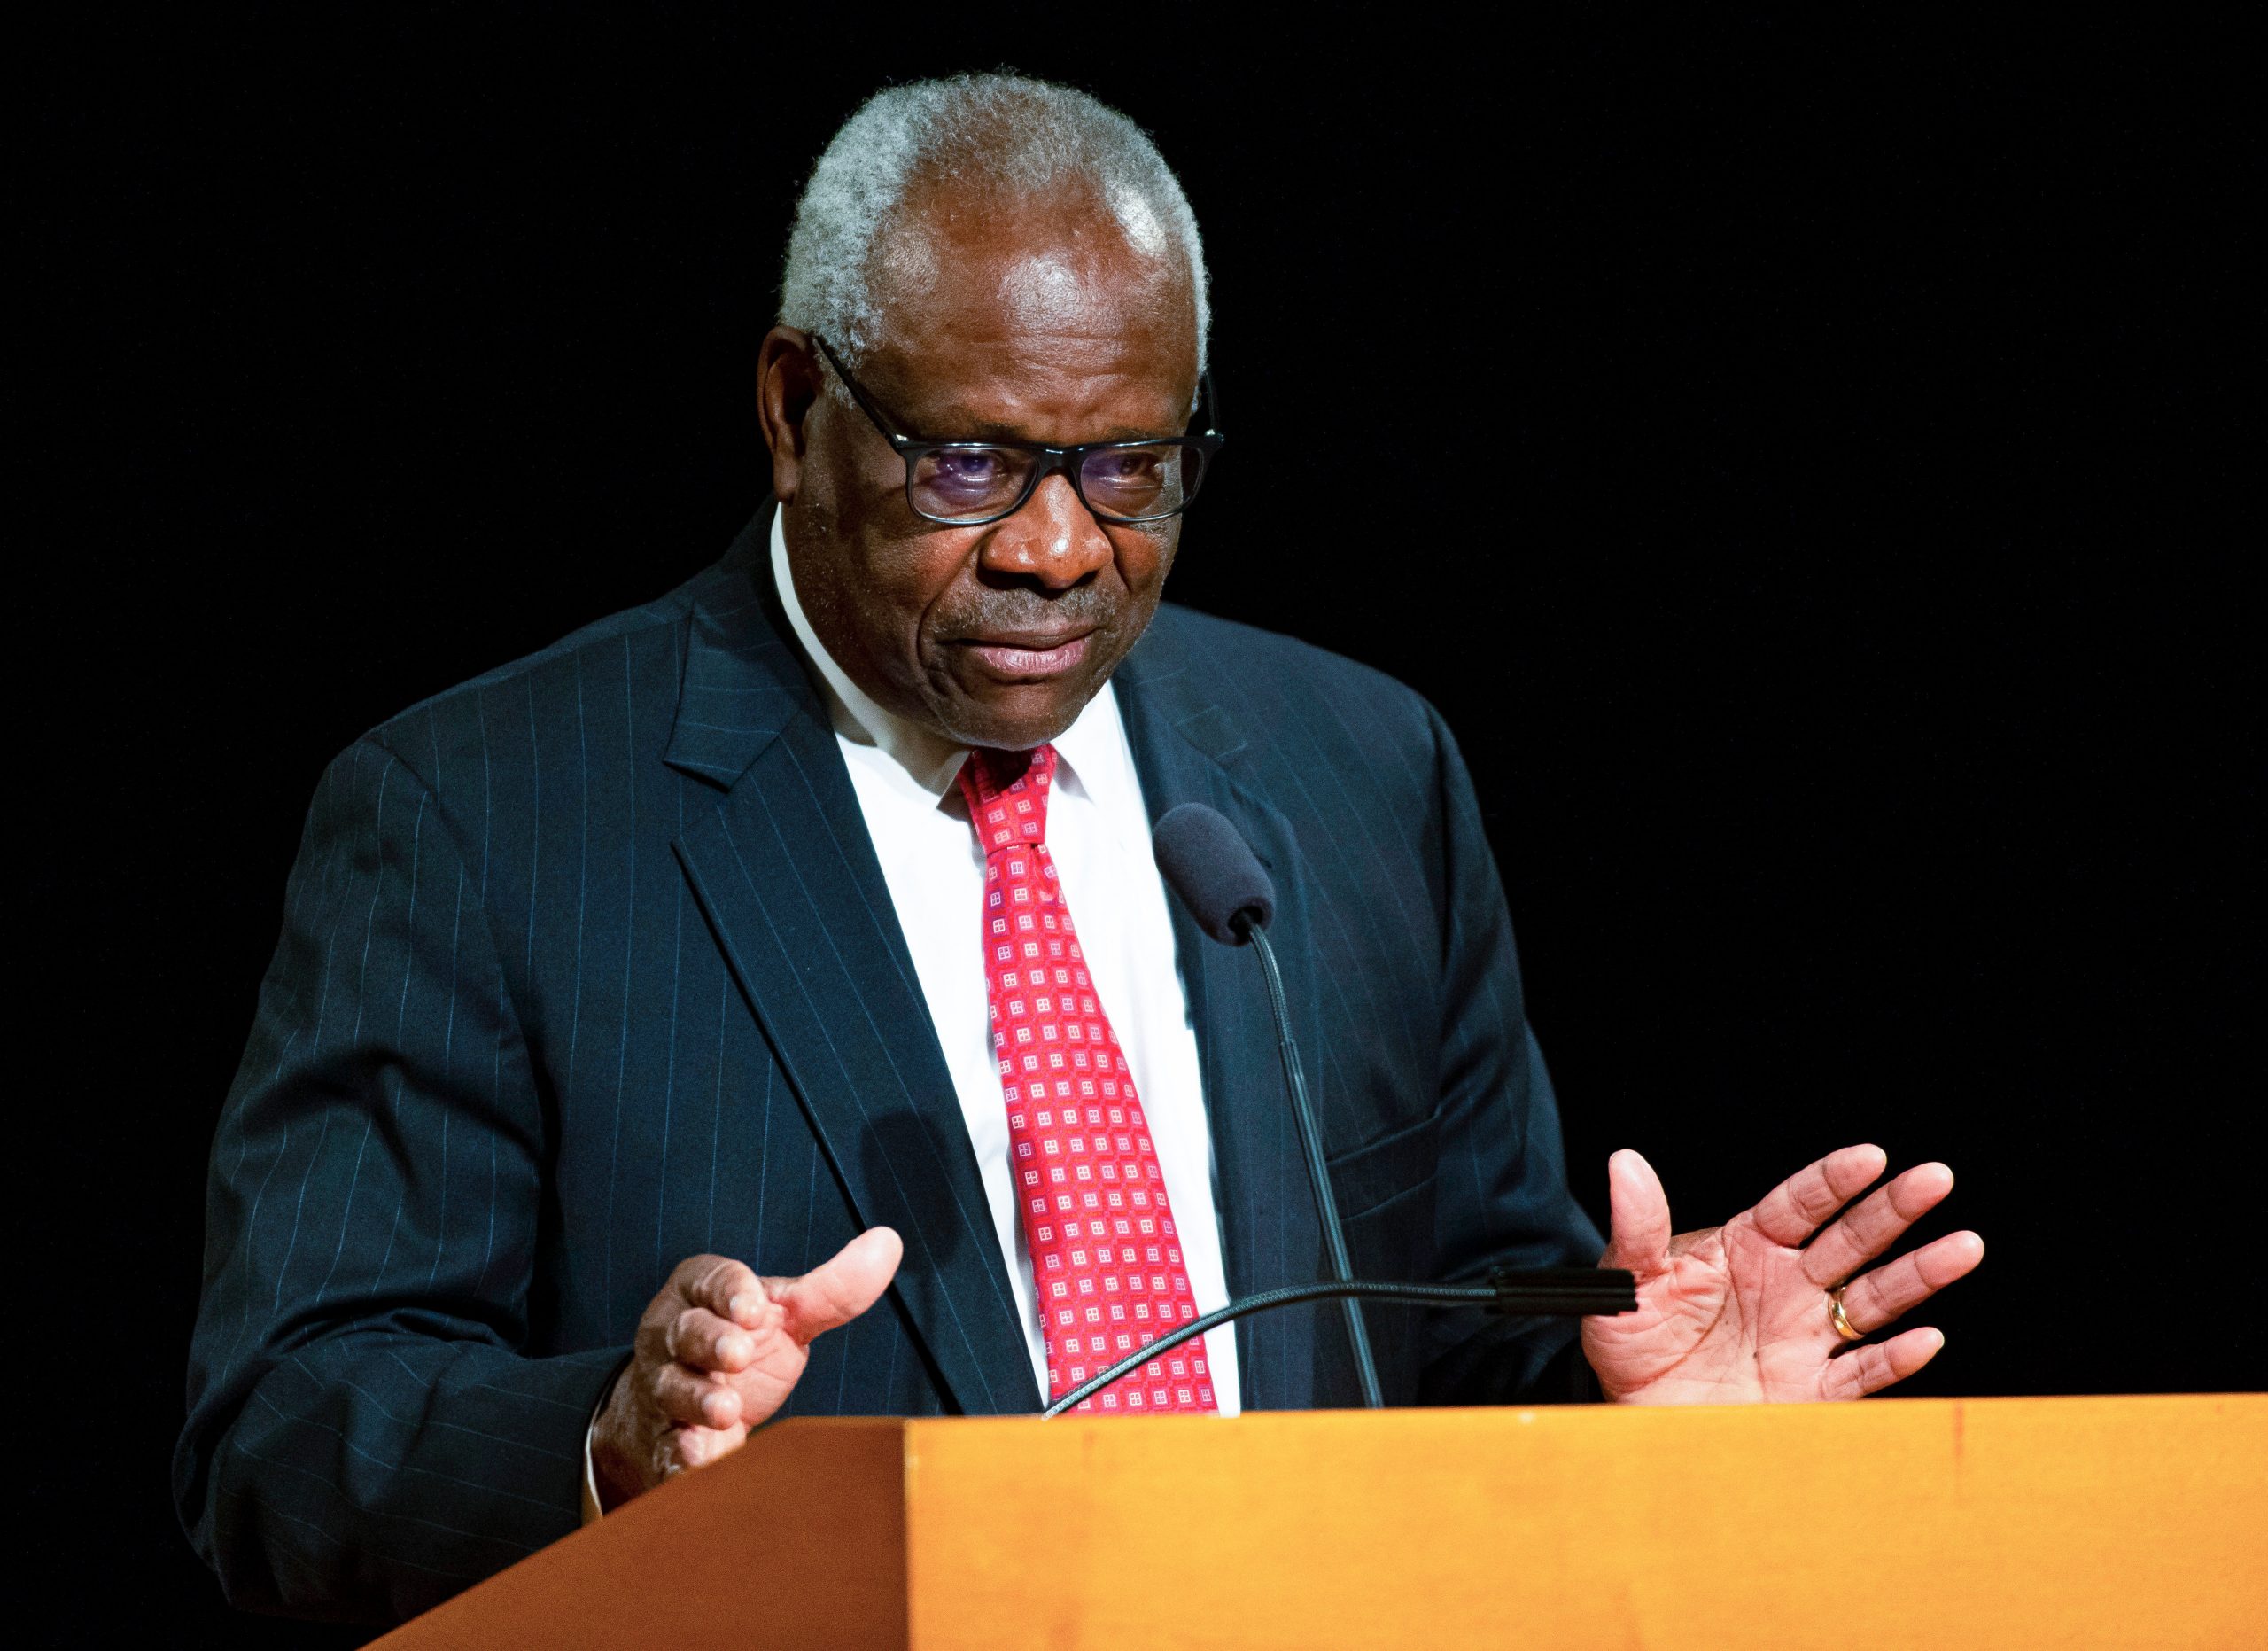 Who is Clarence Thomas?